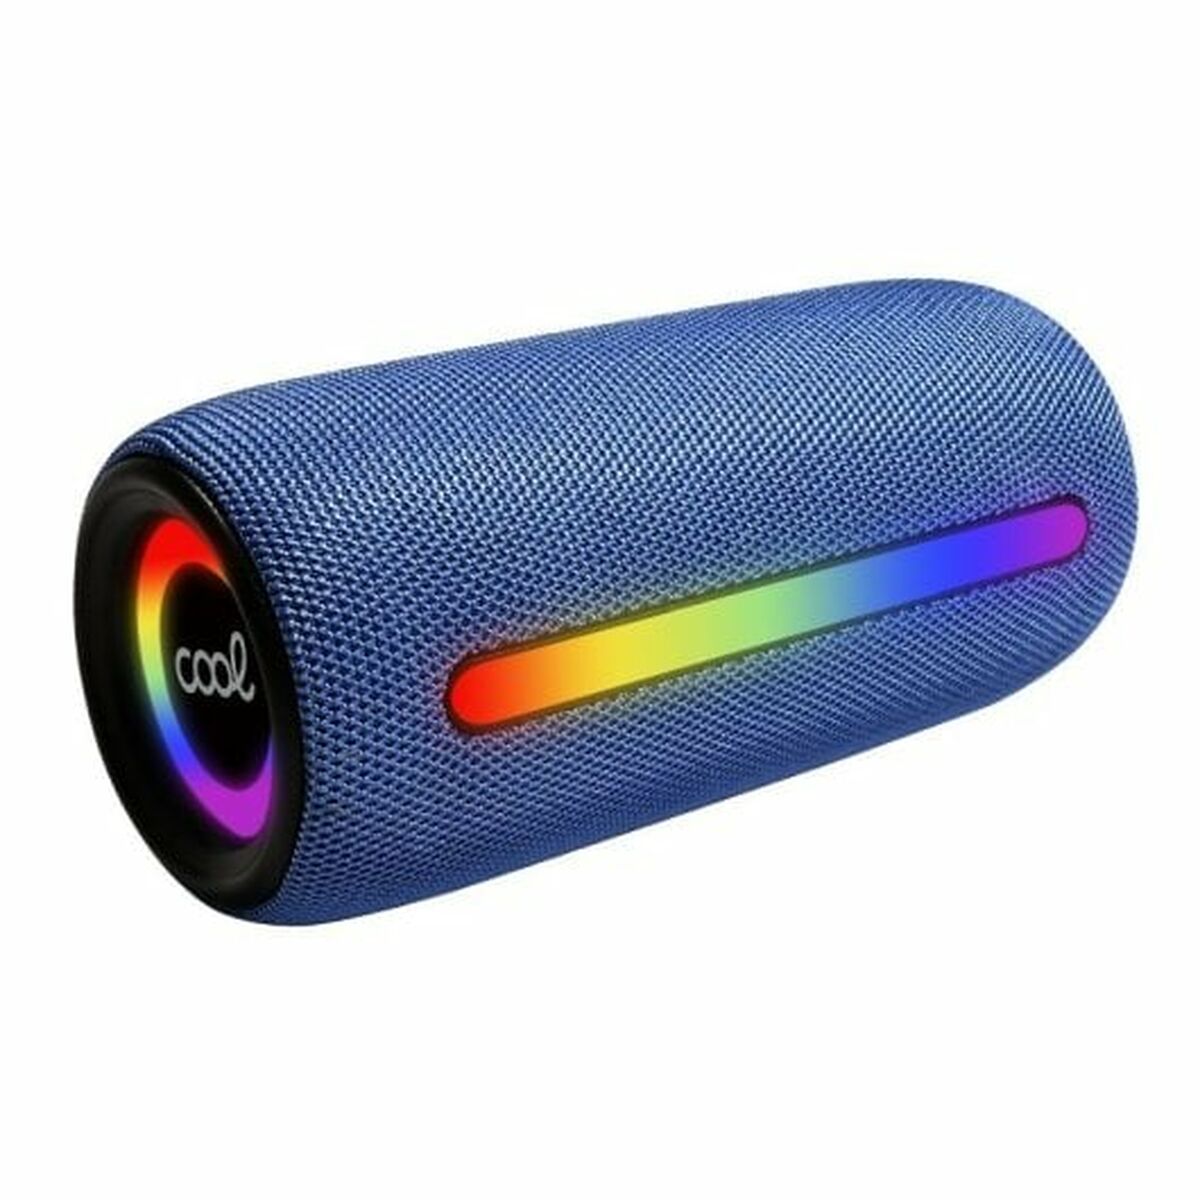 Portable Bluetooth Speakers Cool Desk Blue, Cool, Electronics, Mobile communication and accessories, portable-bluetooth-speakers-cool-desk-blue, Brand_Cool, category-reference-2609, category-reference-2882, category-reference-2923, category-reference-t-19653, category-reference-t-21311, category-reference-t-25527, category-reference-t-4036, category-reference-t-4037, Condition_NEW, entertainment, music, Price_20 - 50, telephones & tablets, wifi y bluetooth, RiotNook